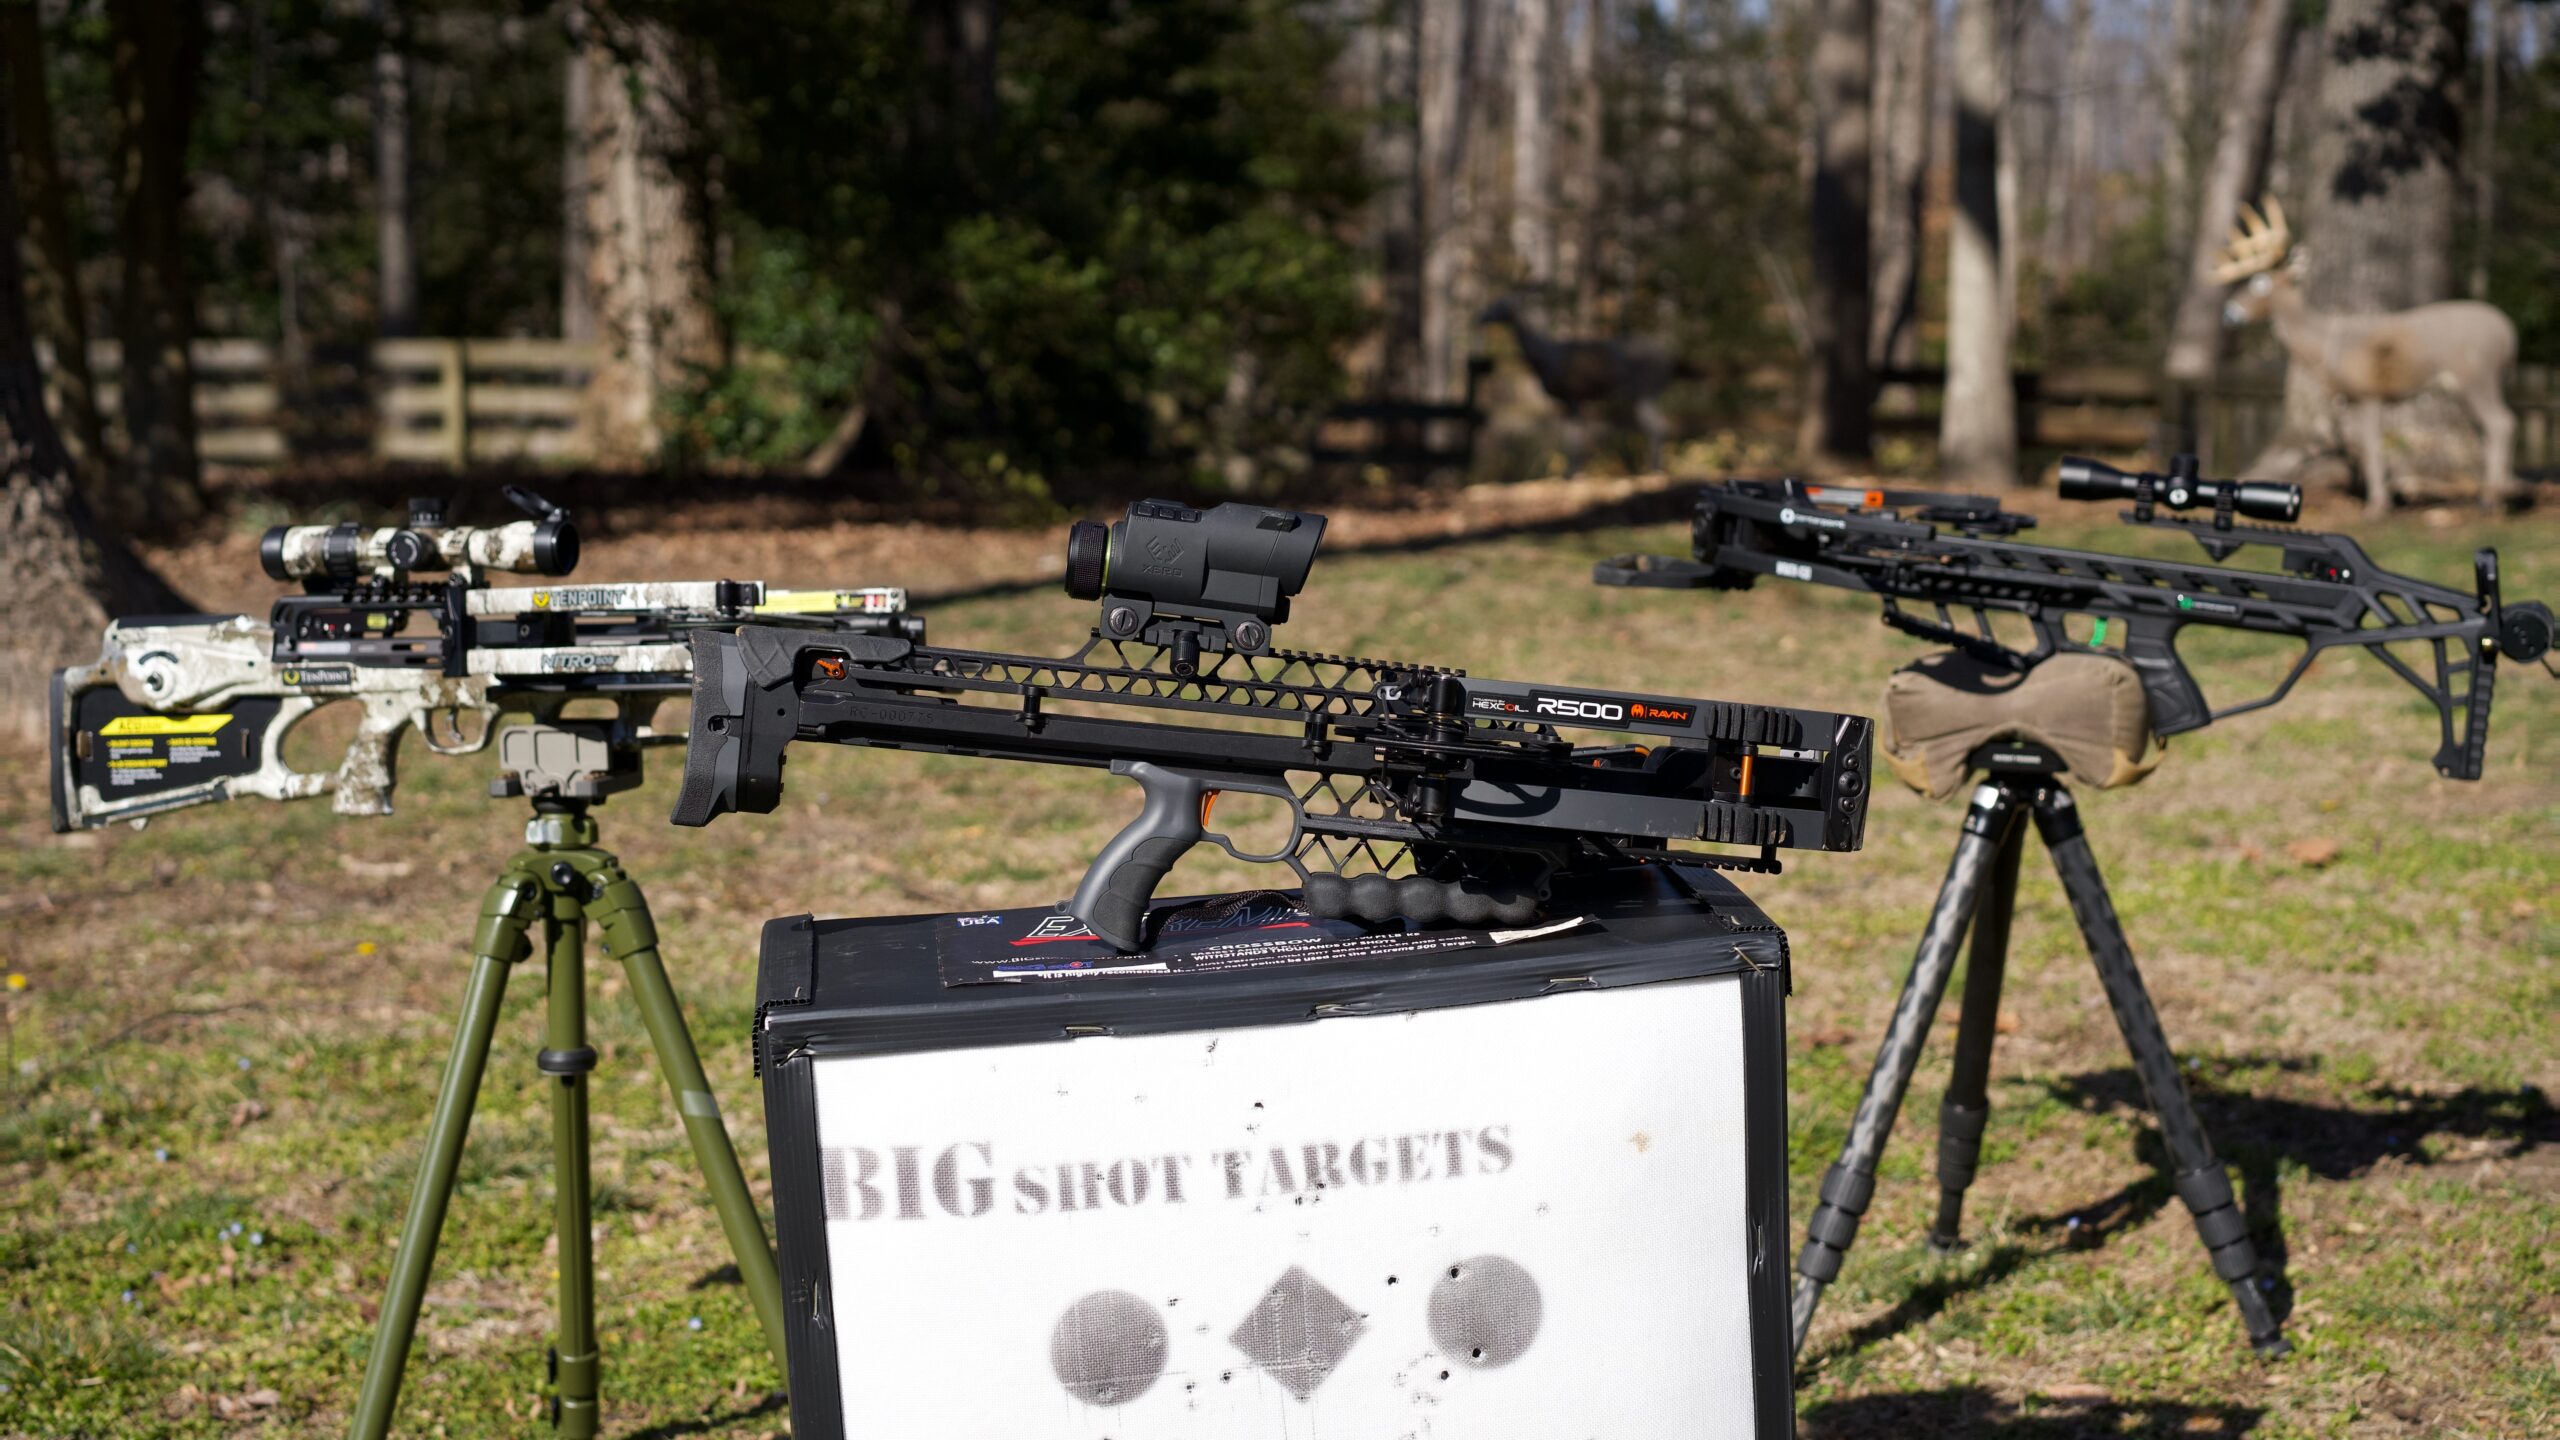 The best crossbows, the tenpoint nitro 505, ravin r500, and centerpoint wrath 430 displayed